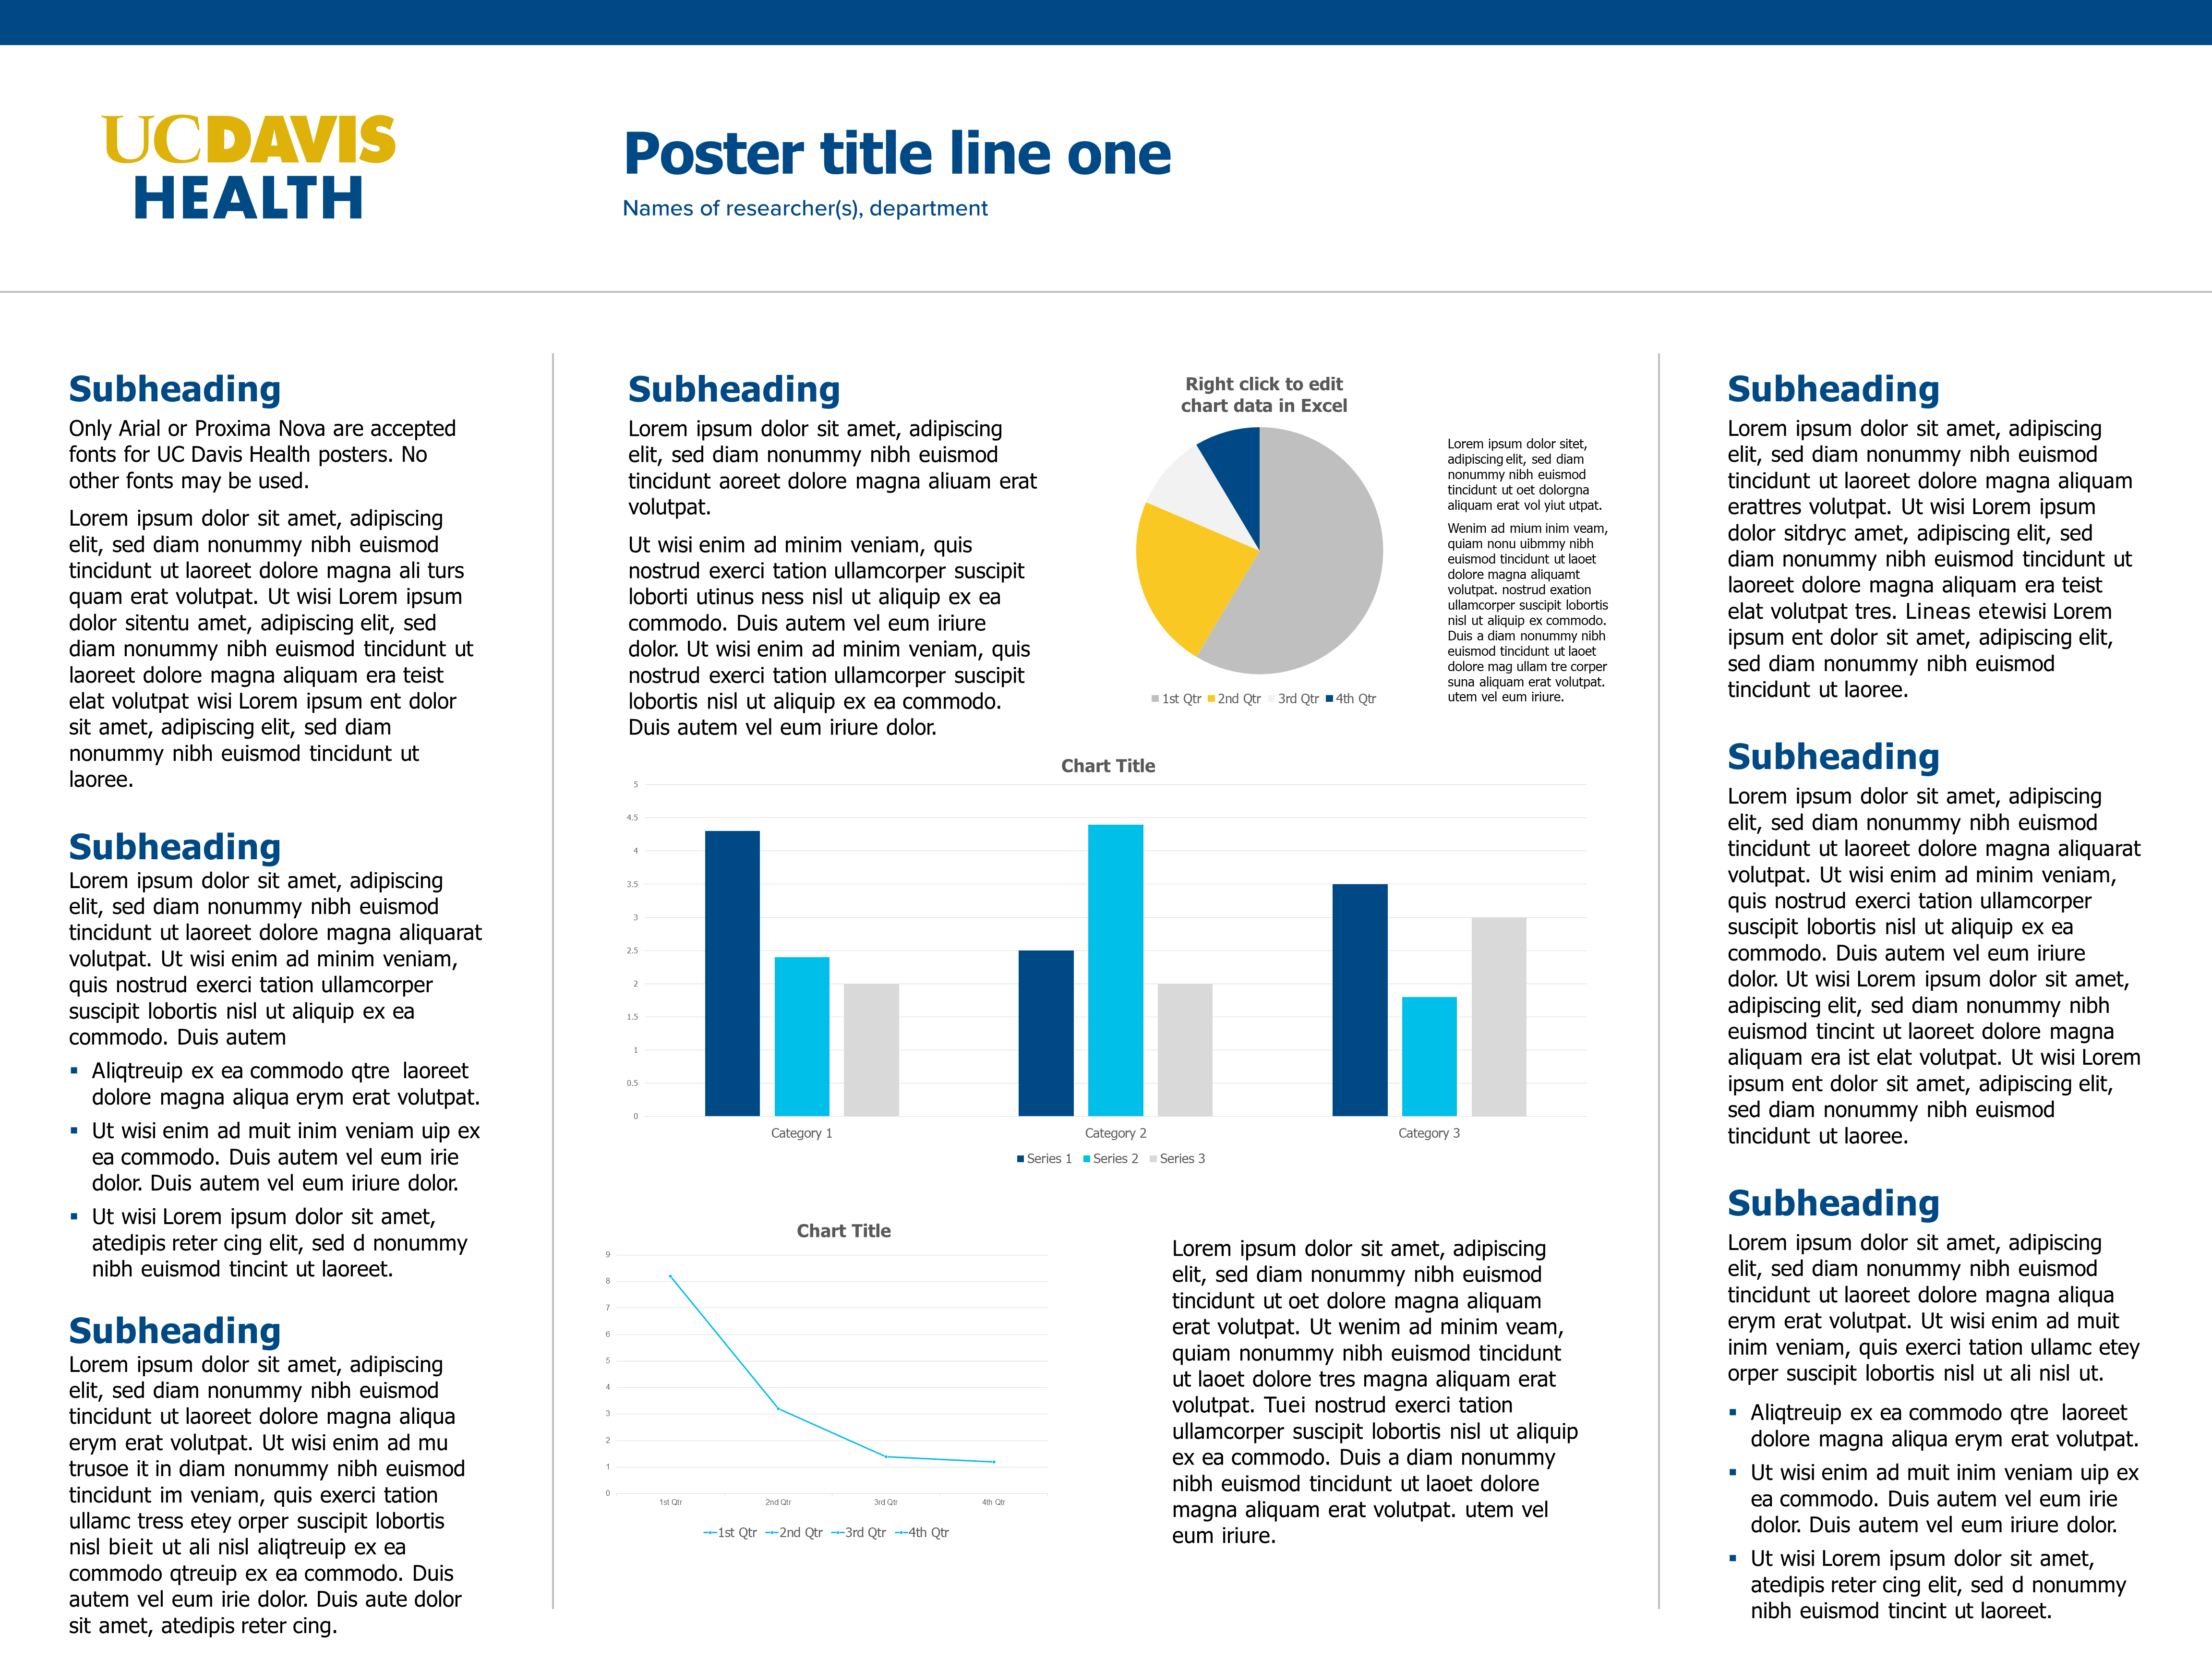 UC Davis Health research poster example